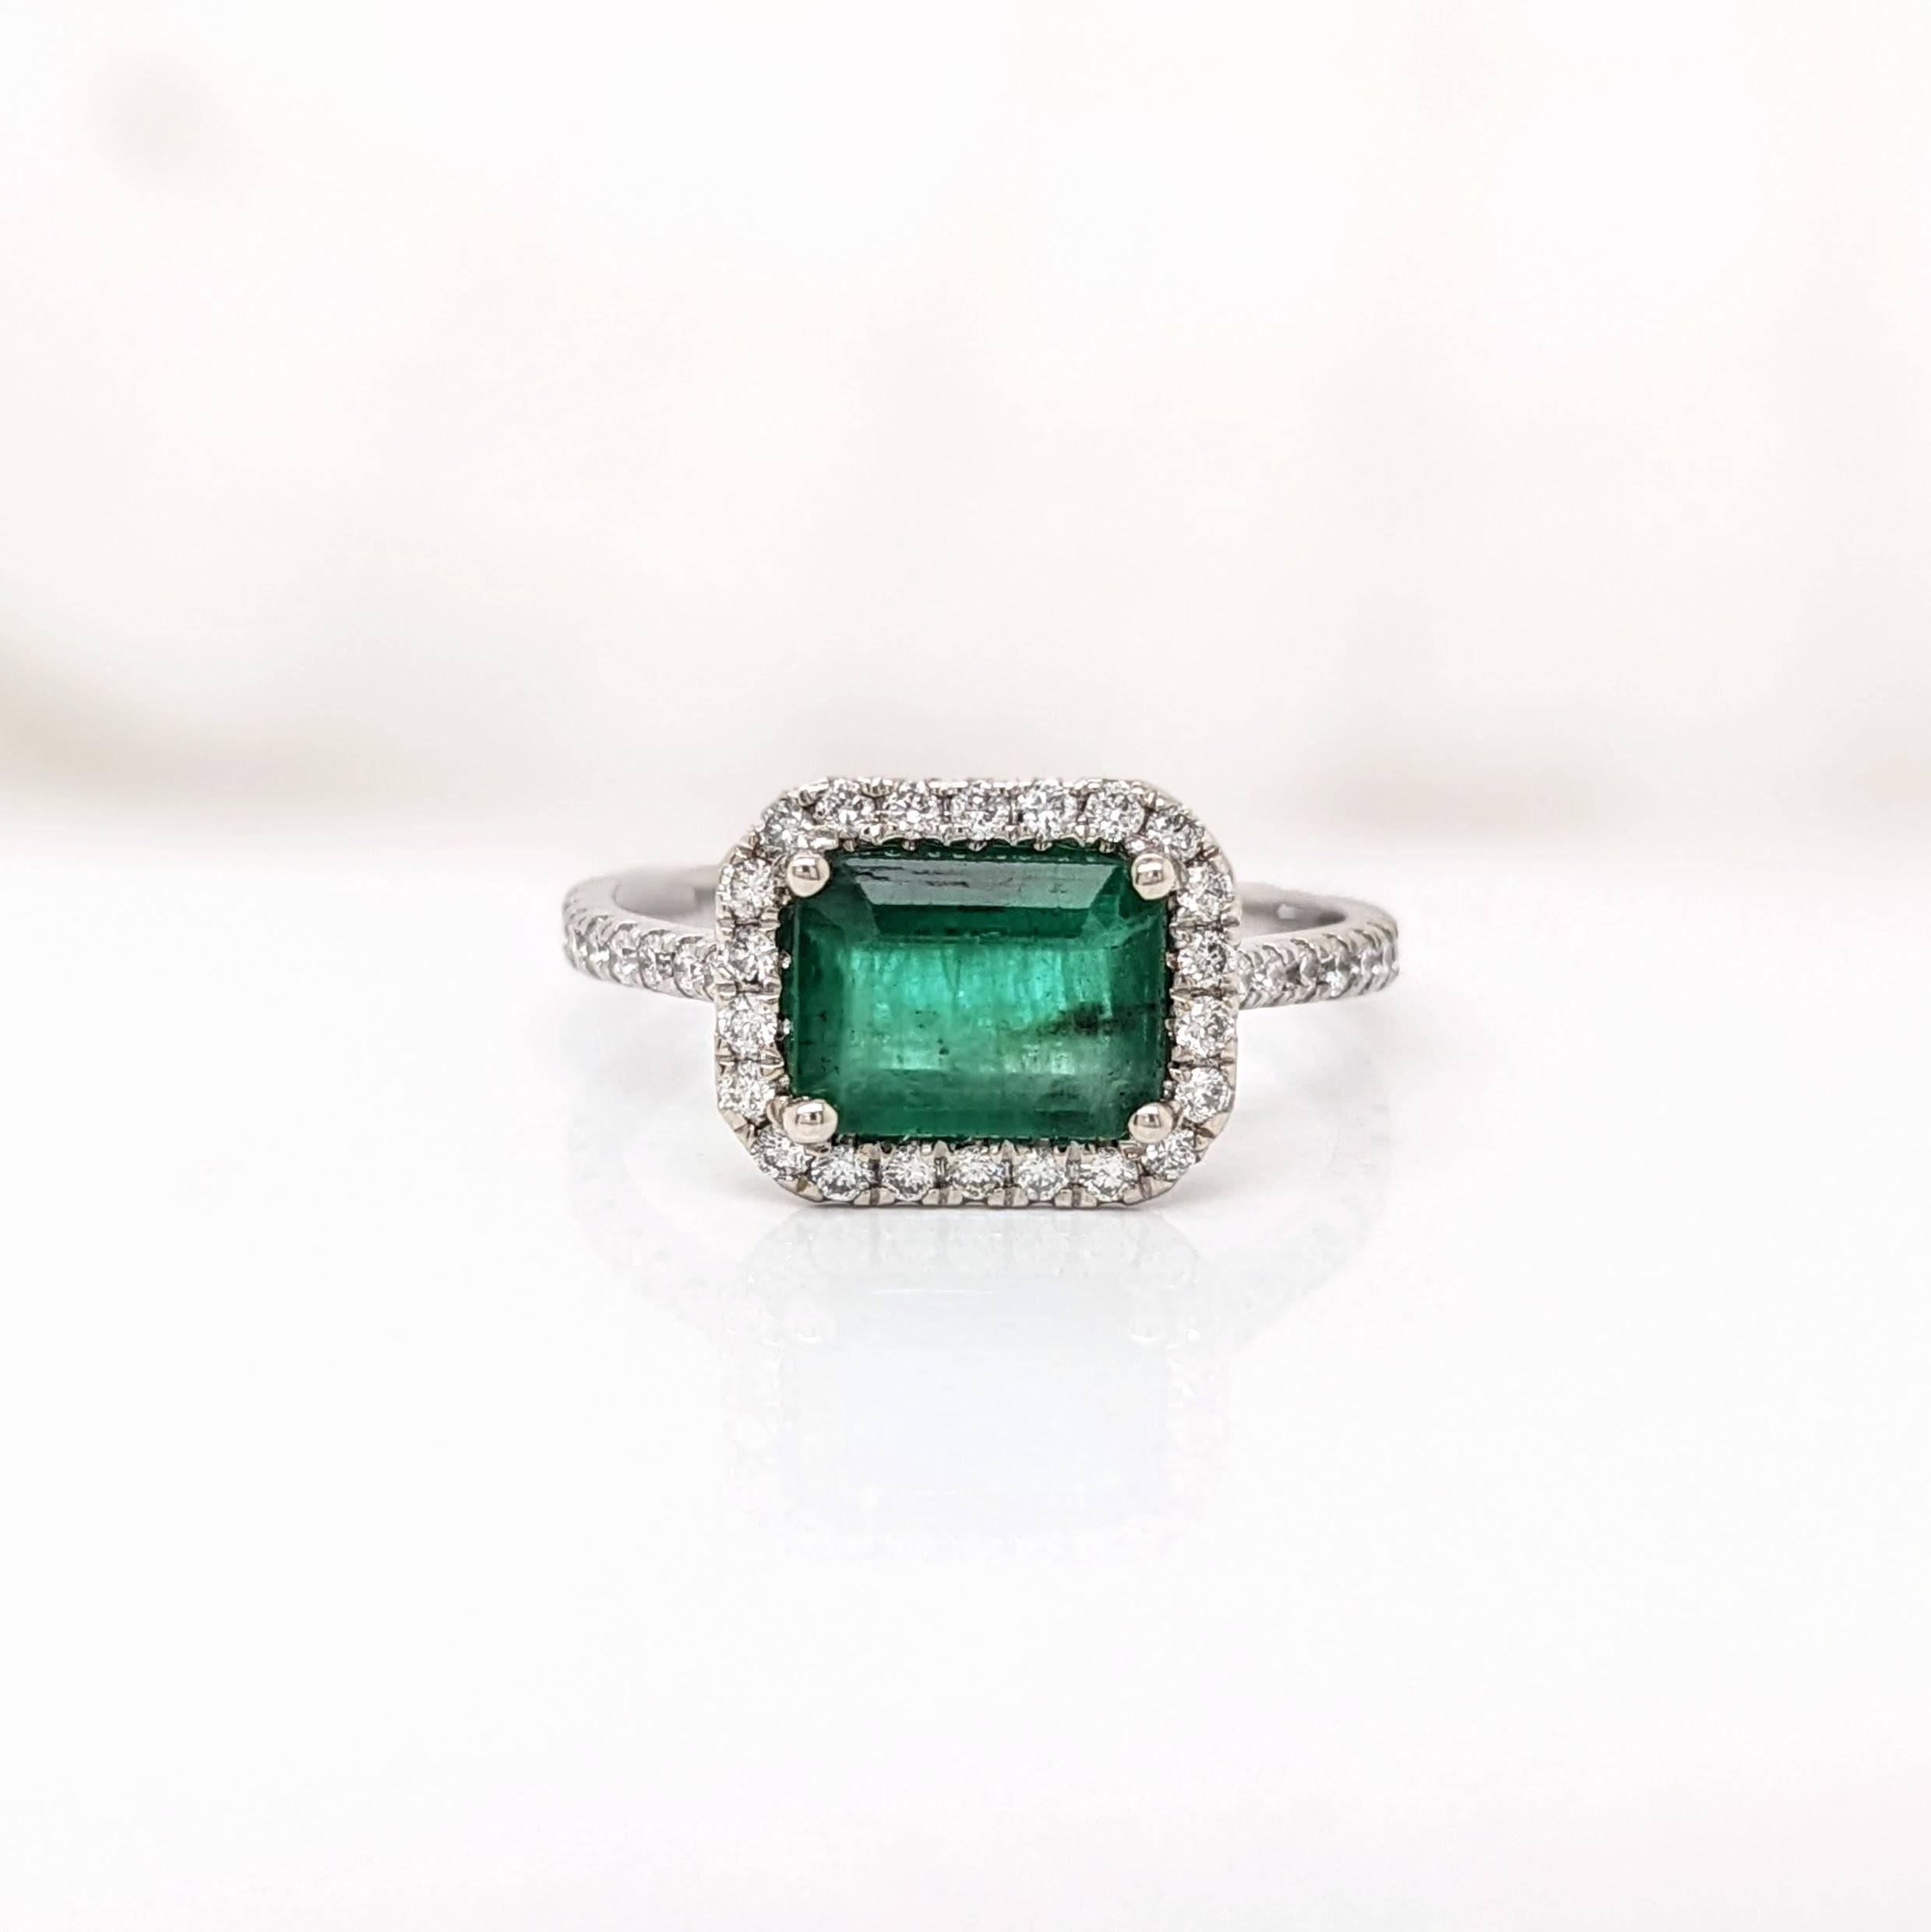 Taille émeraude 1.2ct East West Emerald Ring w Natural Diamonds in Solid 14K White Gold EM 8x6mm